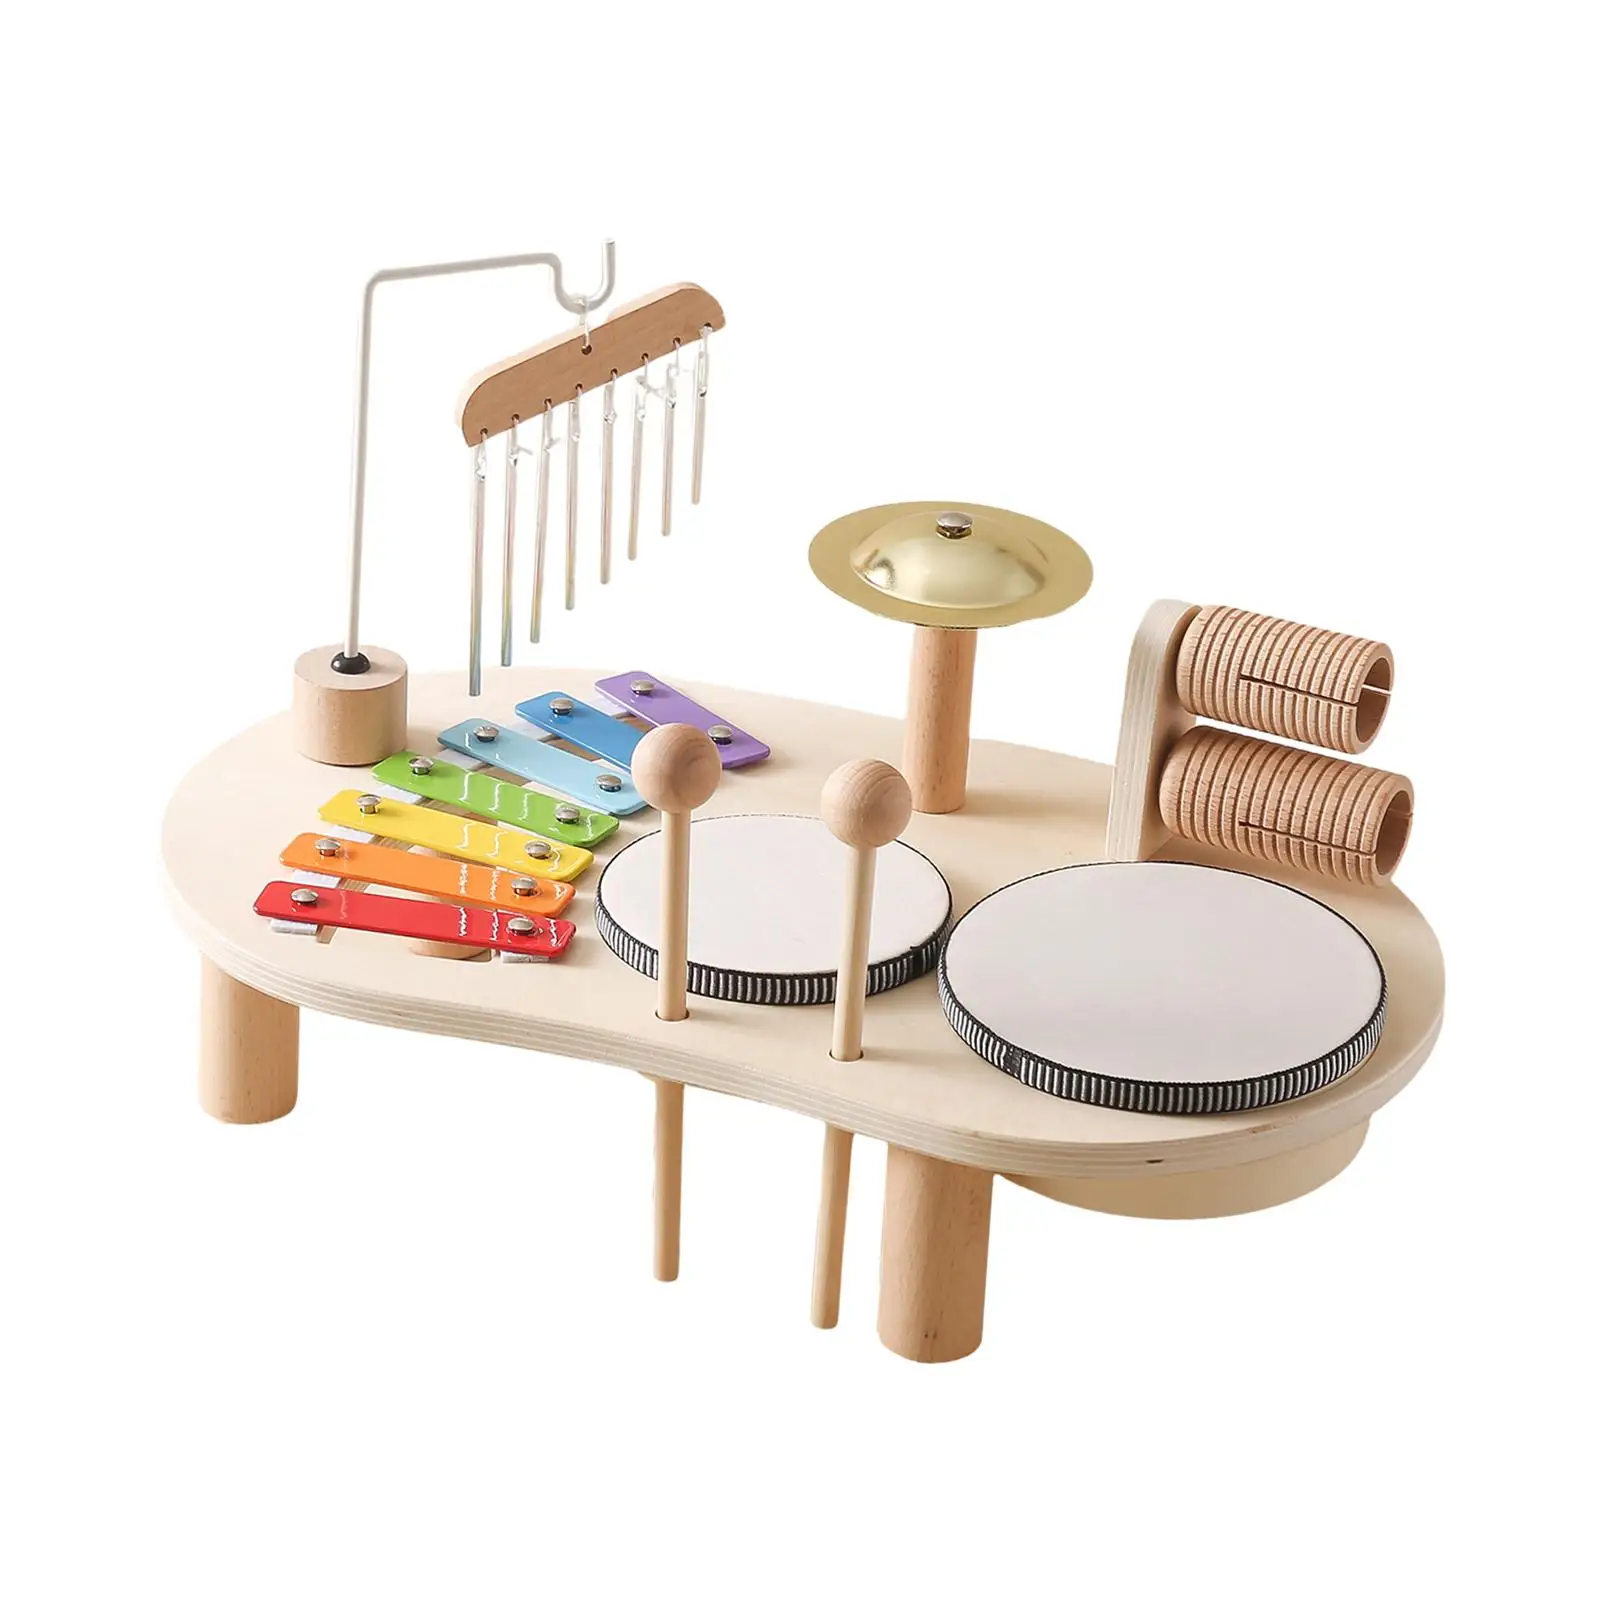 Xylophone Drum Set Developmental Motor Skill Wooden Musical Kits for Kids Boy Girl Toddlers Ages 3 4 5 6 Years Old Birthday Gift